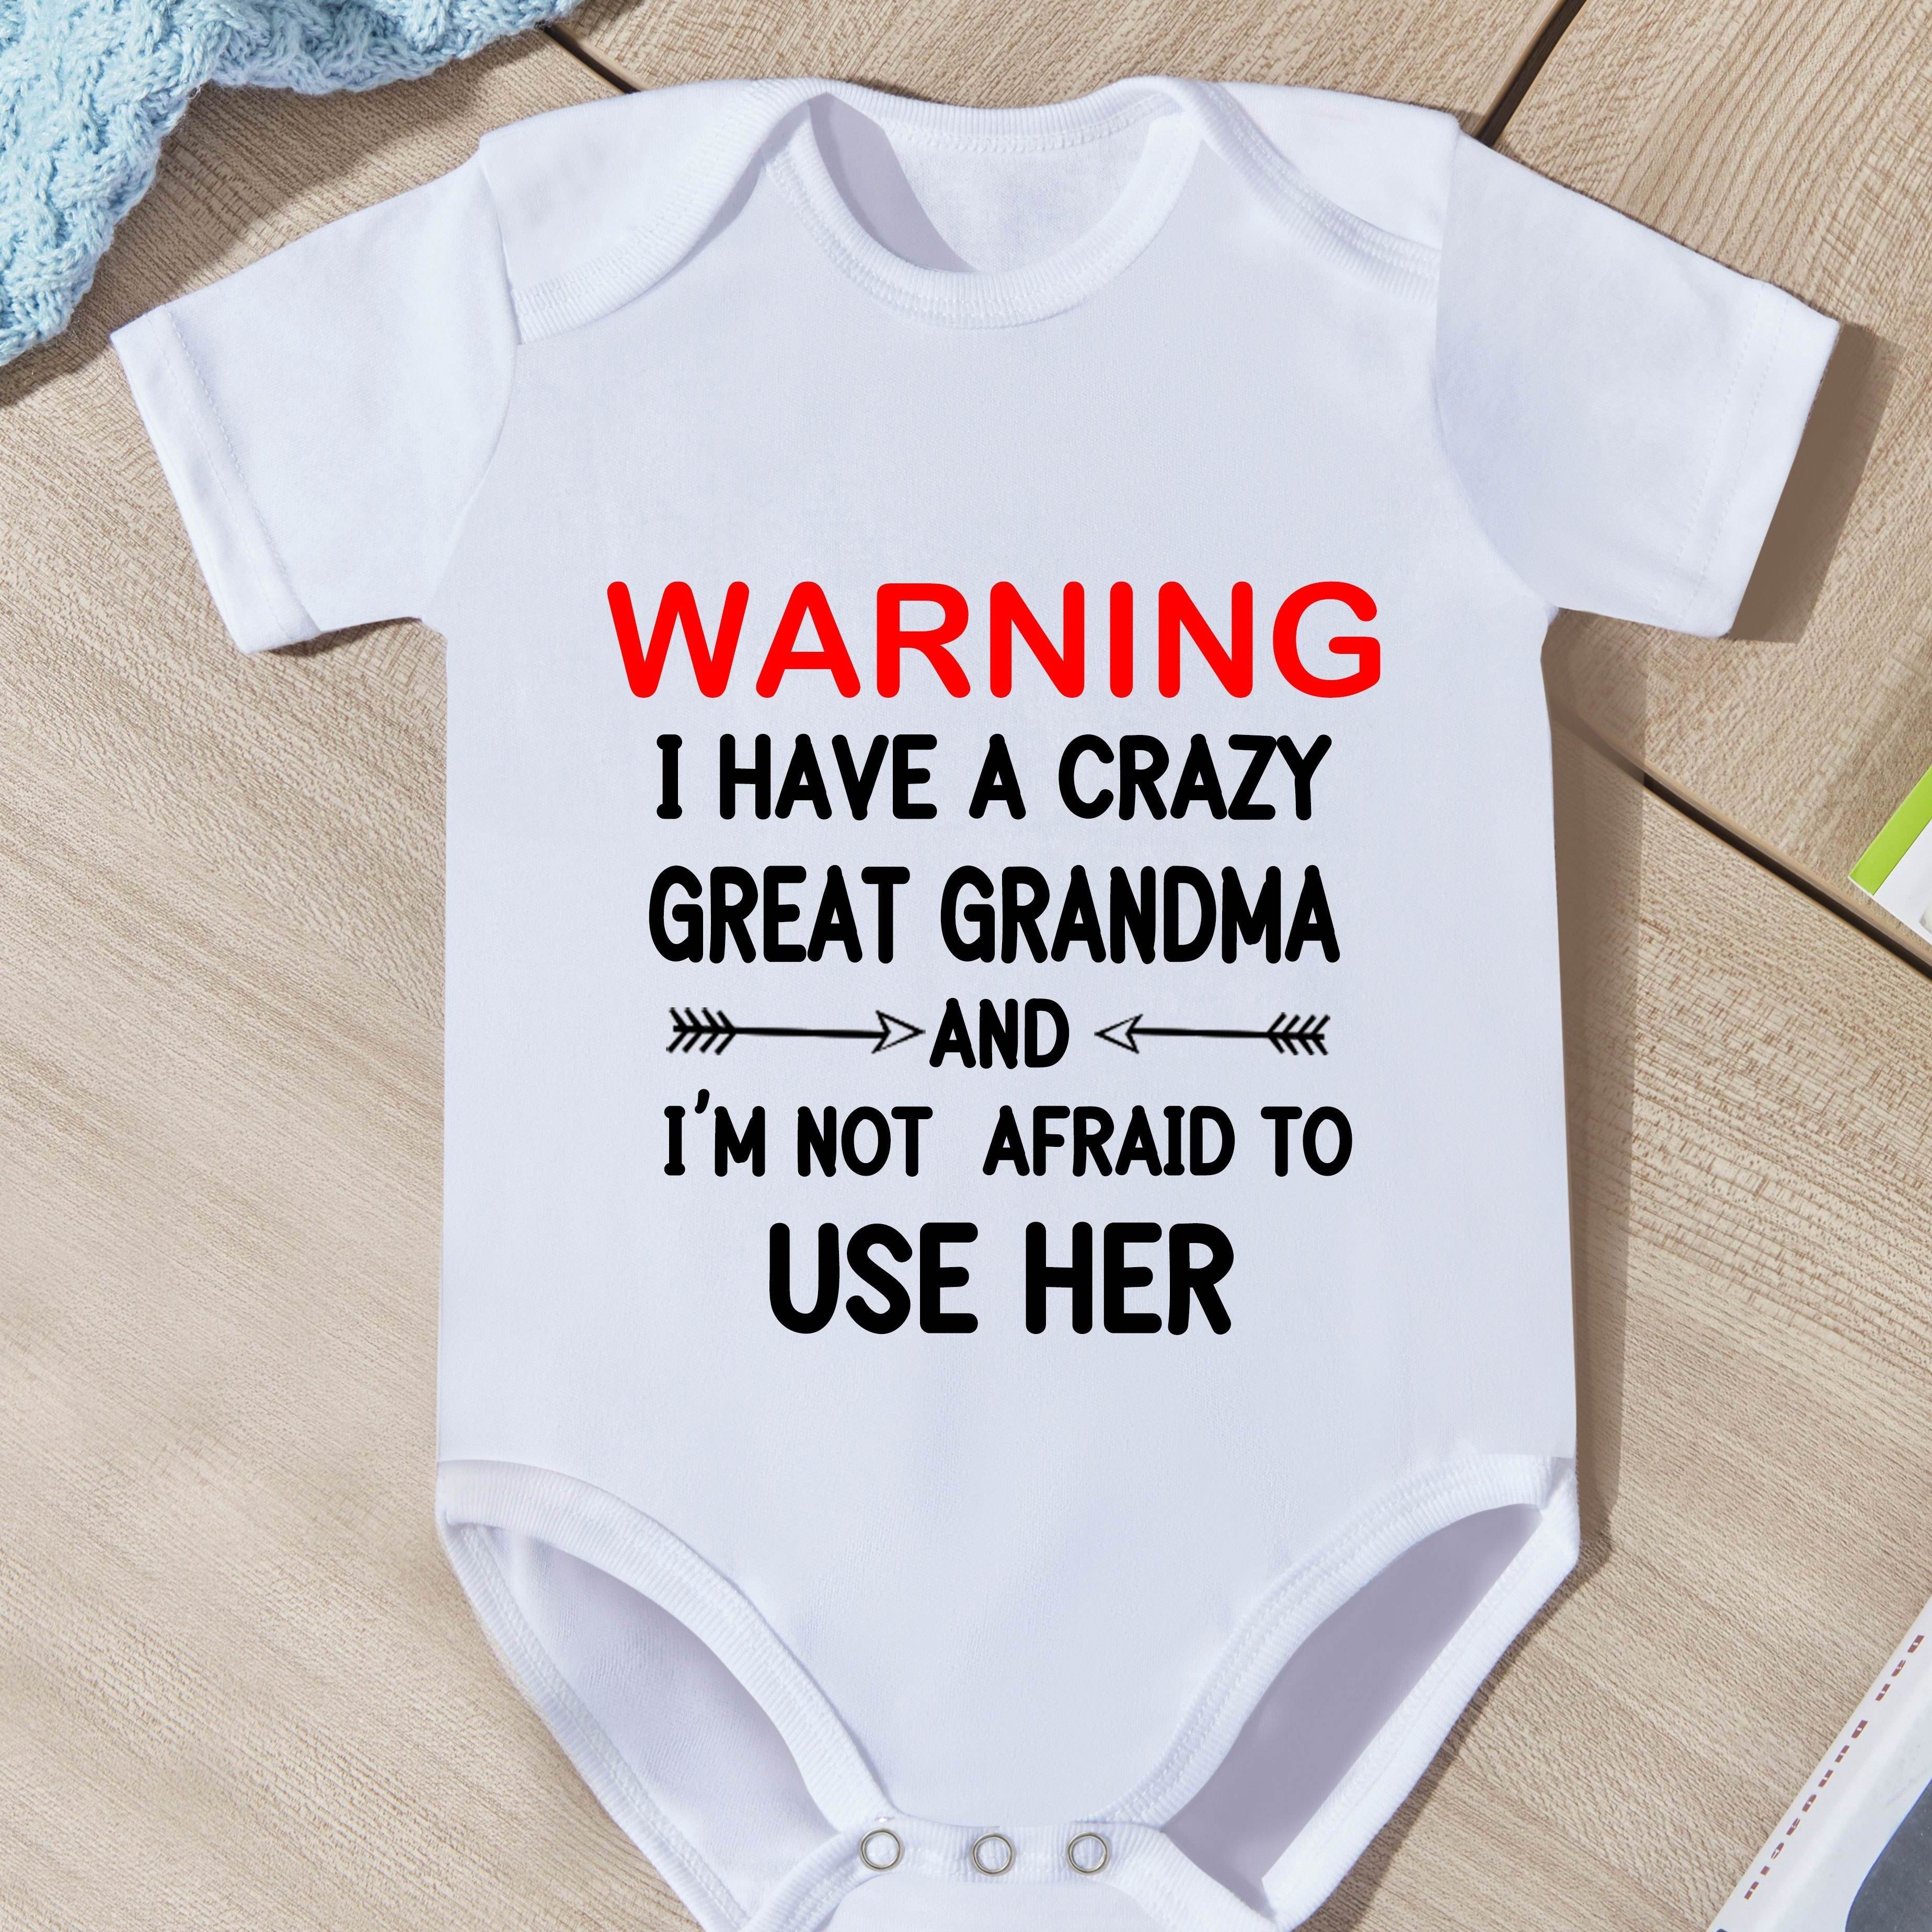 

Infant's "i Have A Crazy Great Grandma" Print Bodysuit, Casual Short Sleeve Onesie, Baby Boy's Clothing